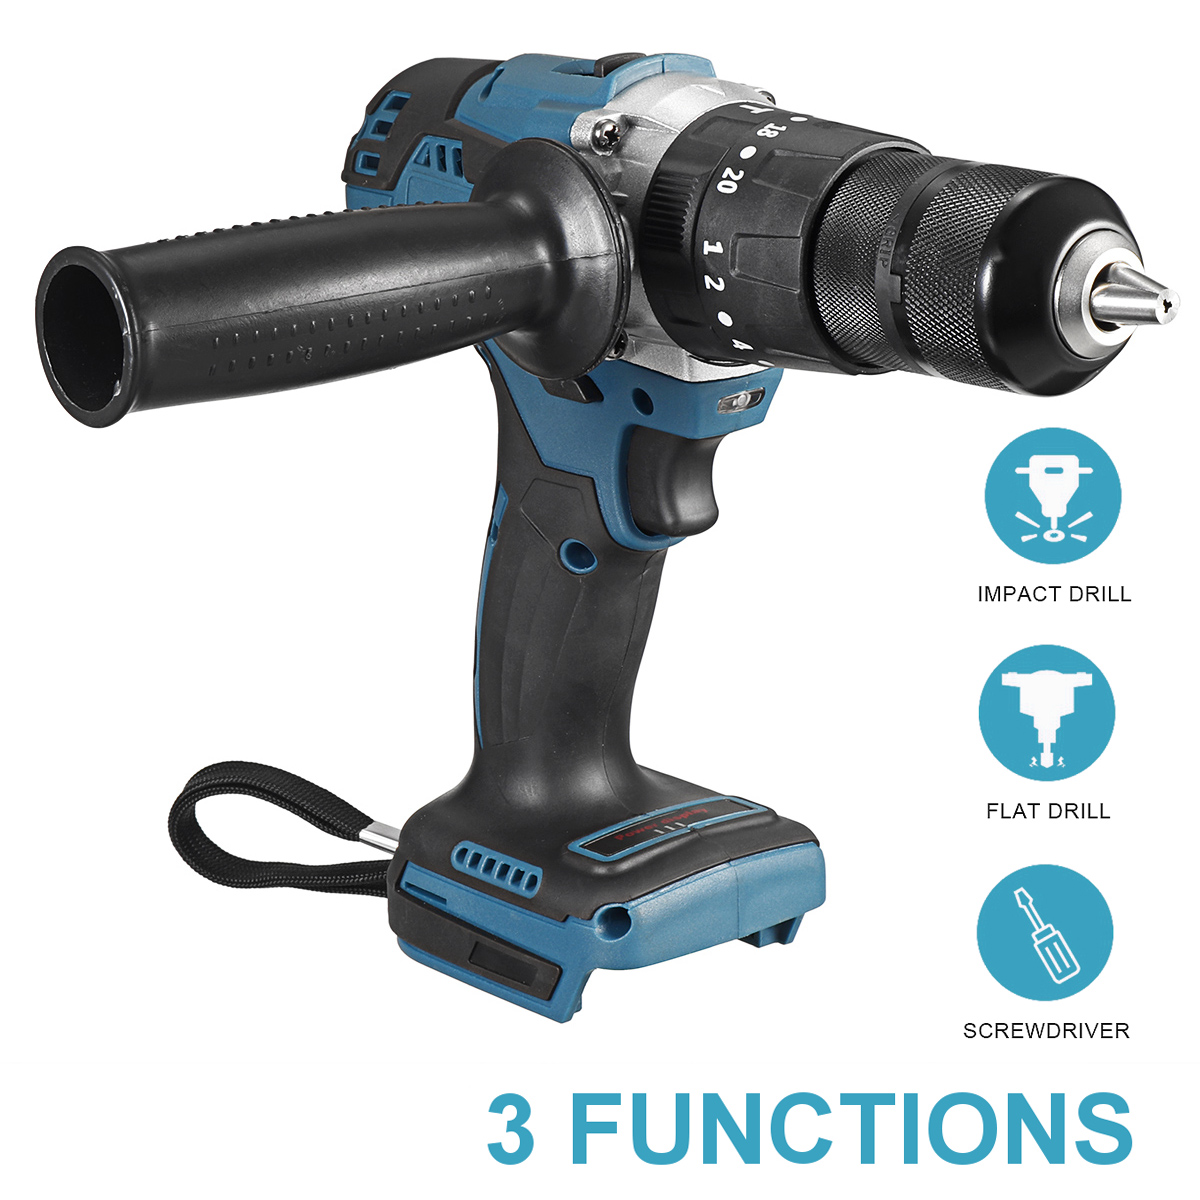 13mm-Chuck-Self-Lock-3-In-1-Brushless-Electric-Drill-20-Torque-2-Speed-Rechargeable-Power-Drills-Dri-1880980-2